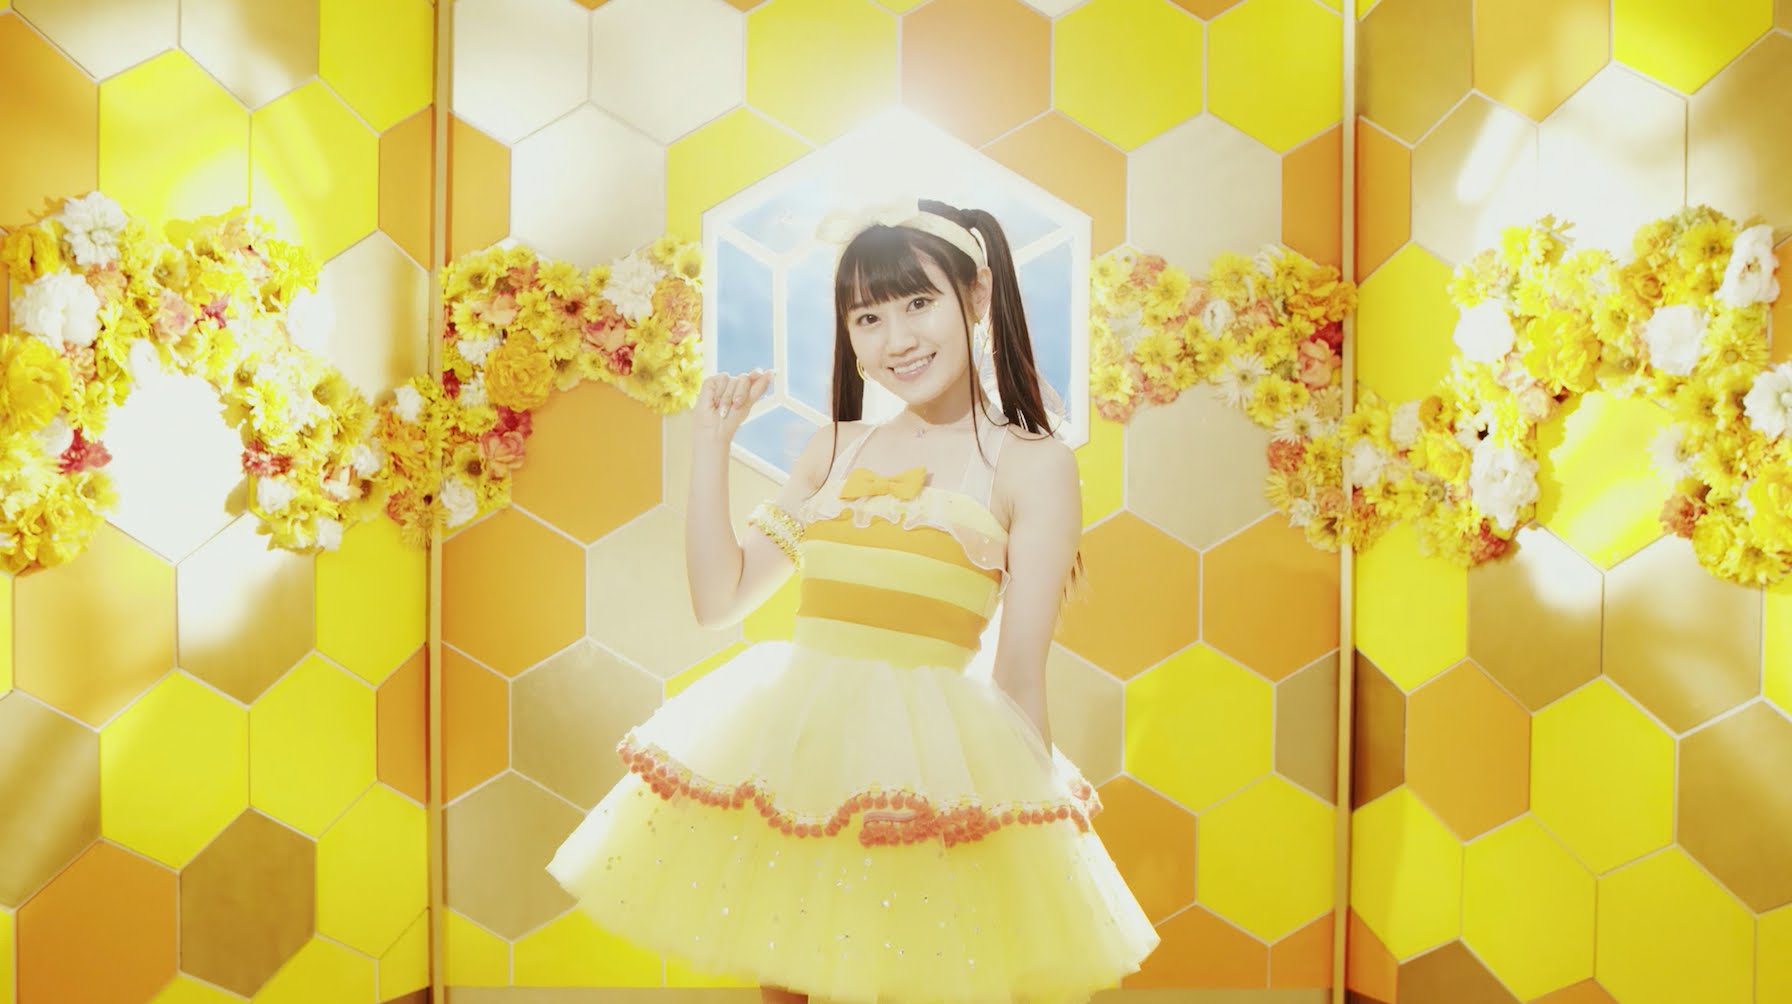 Yui Ogura Is Sweetened With Honey? Check Out The MV for Her 5th Single “Honey♥Come!!”